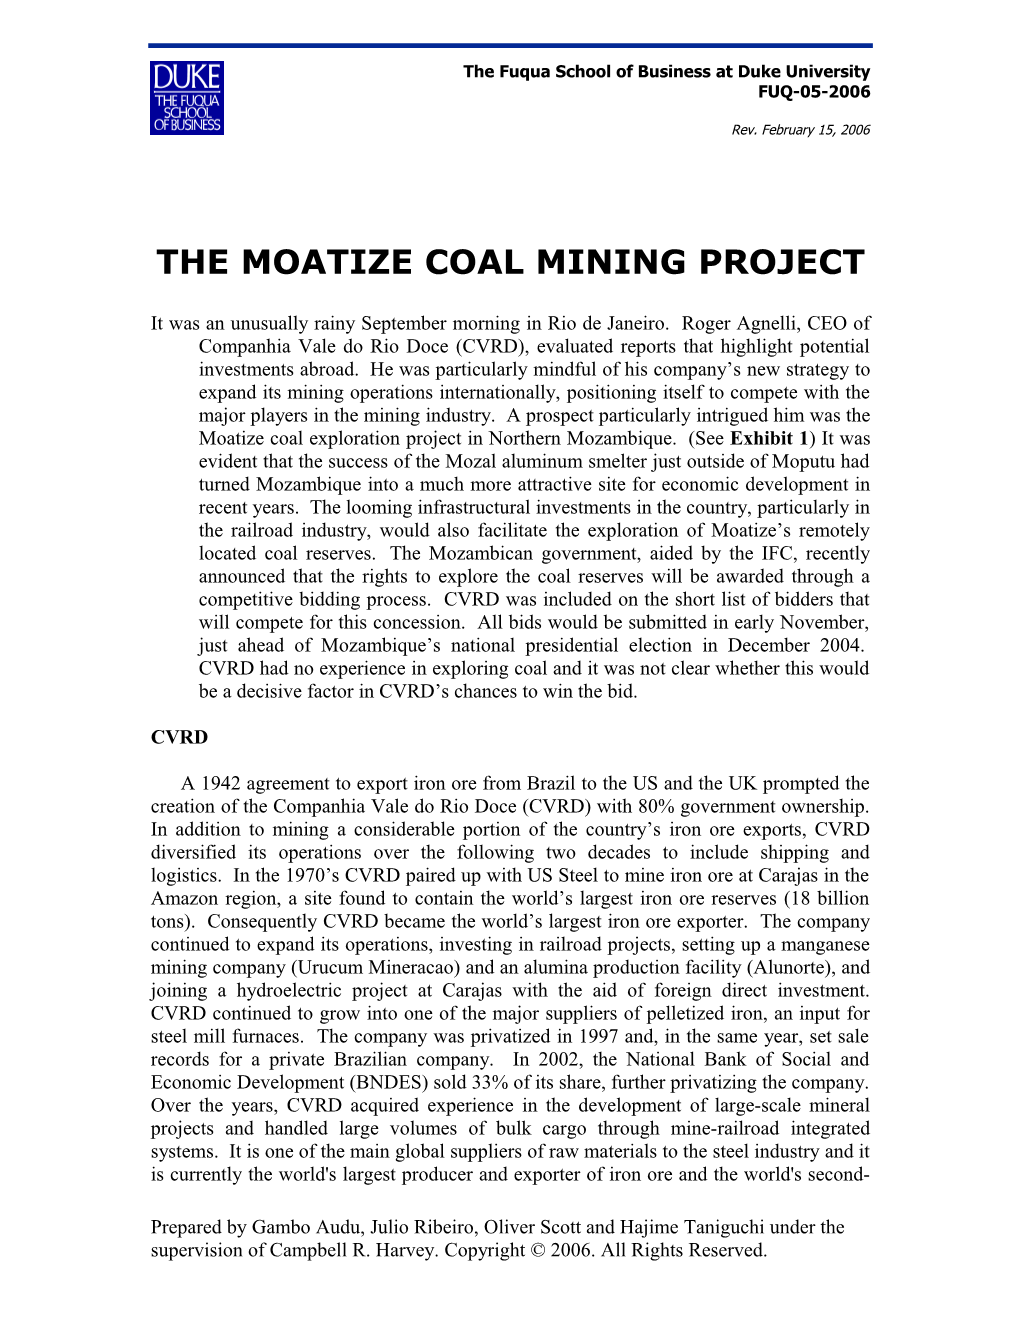 The Moatize Coal Mining Project